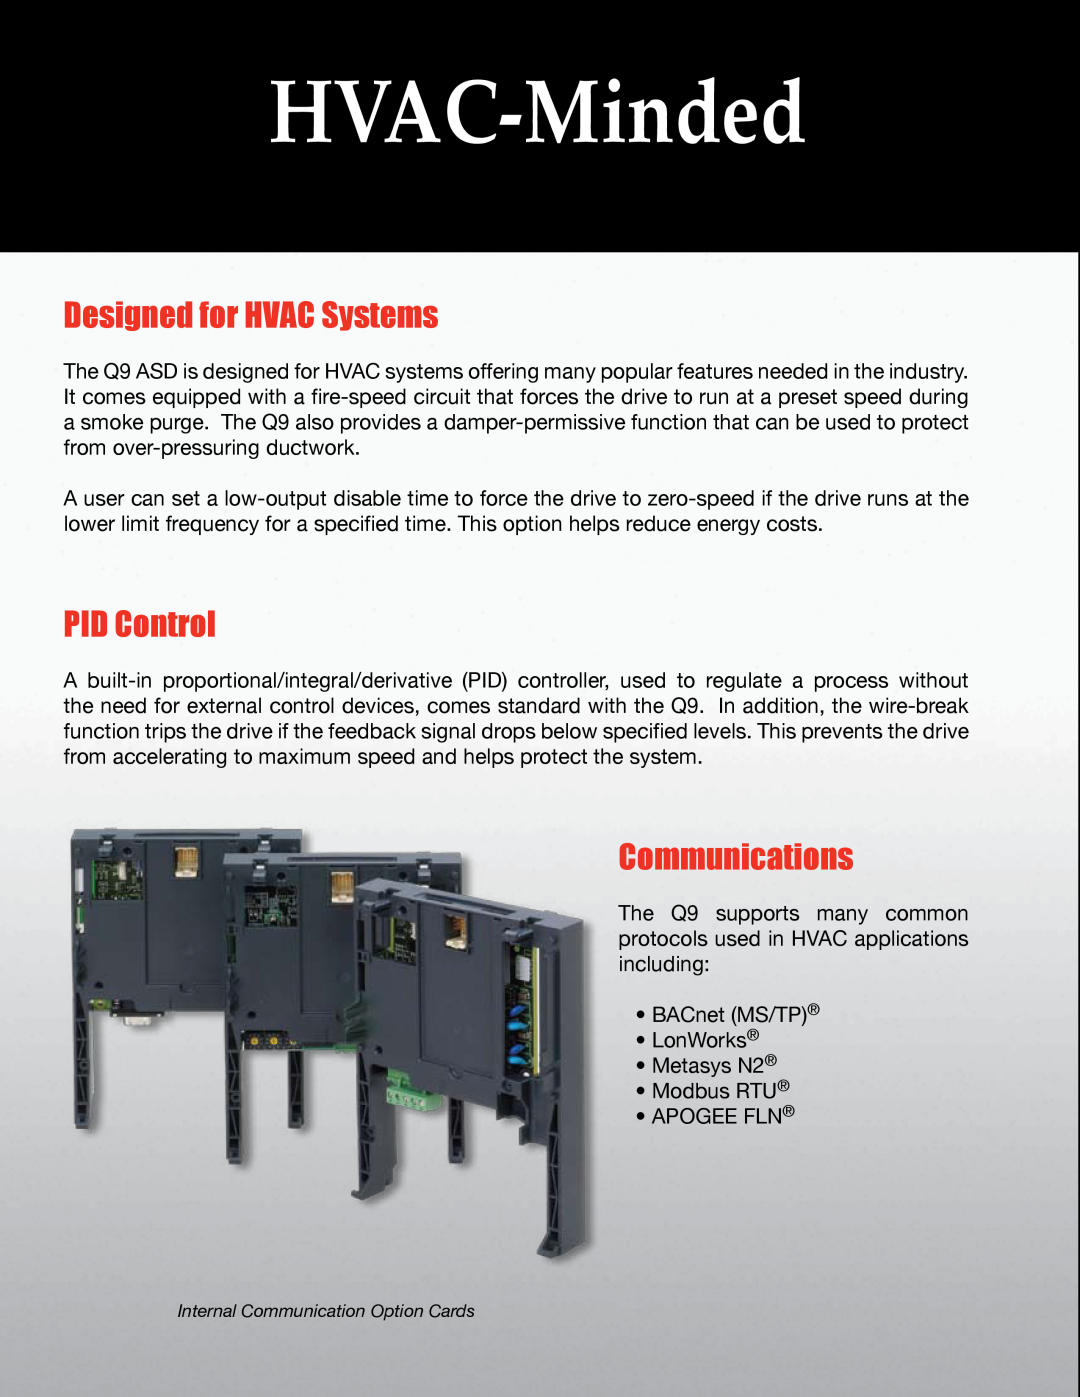 Toshiba Q9 Series manual Designed for HVAC Systems, PID Control, Communications, HVAC-Minded 